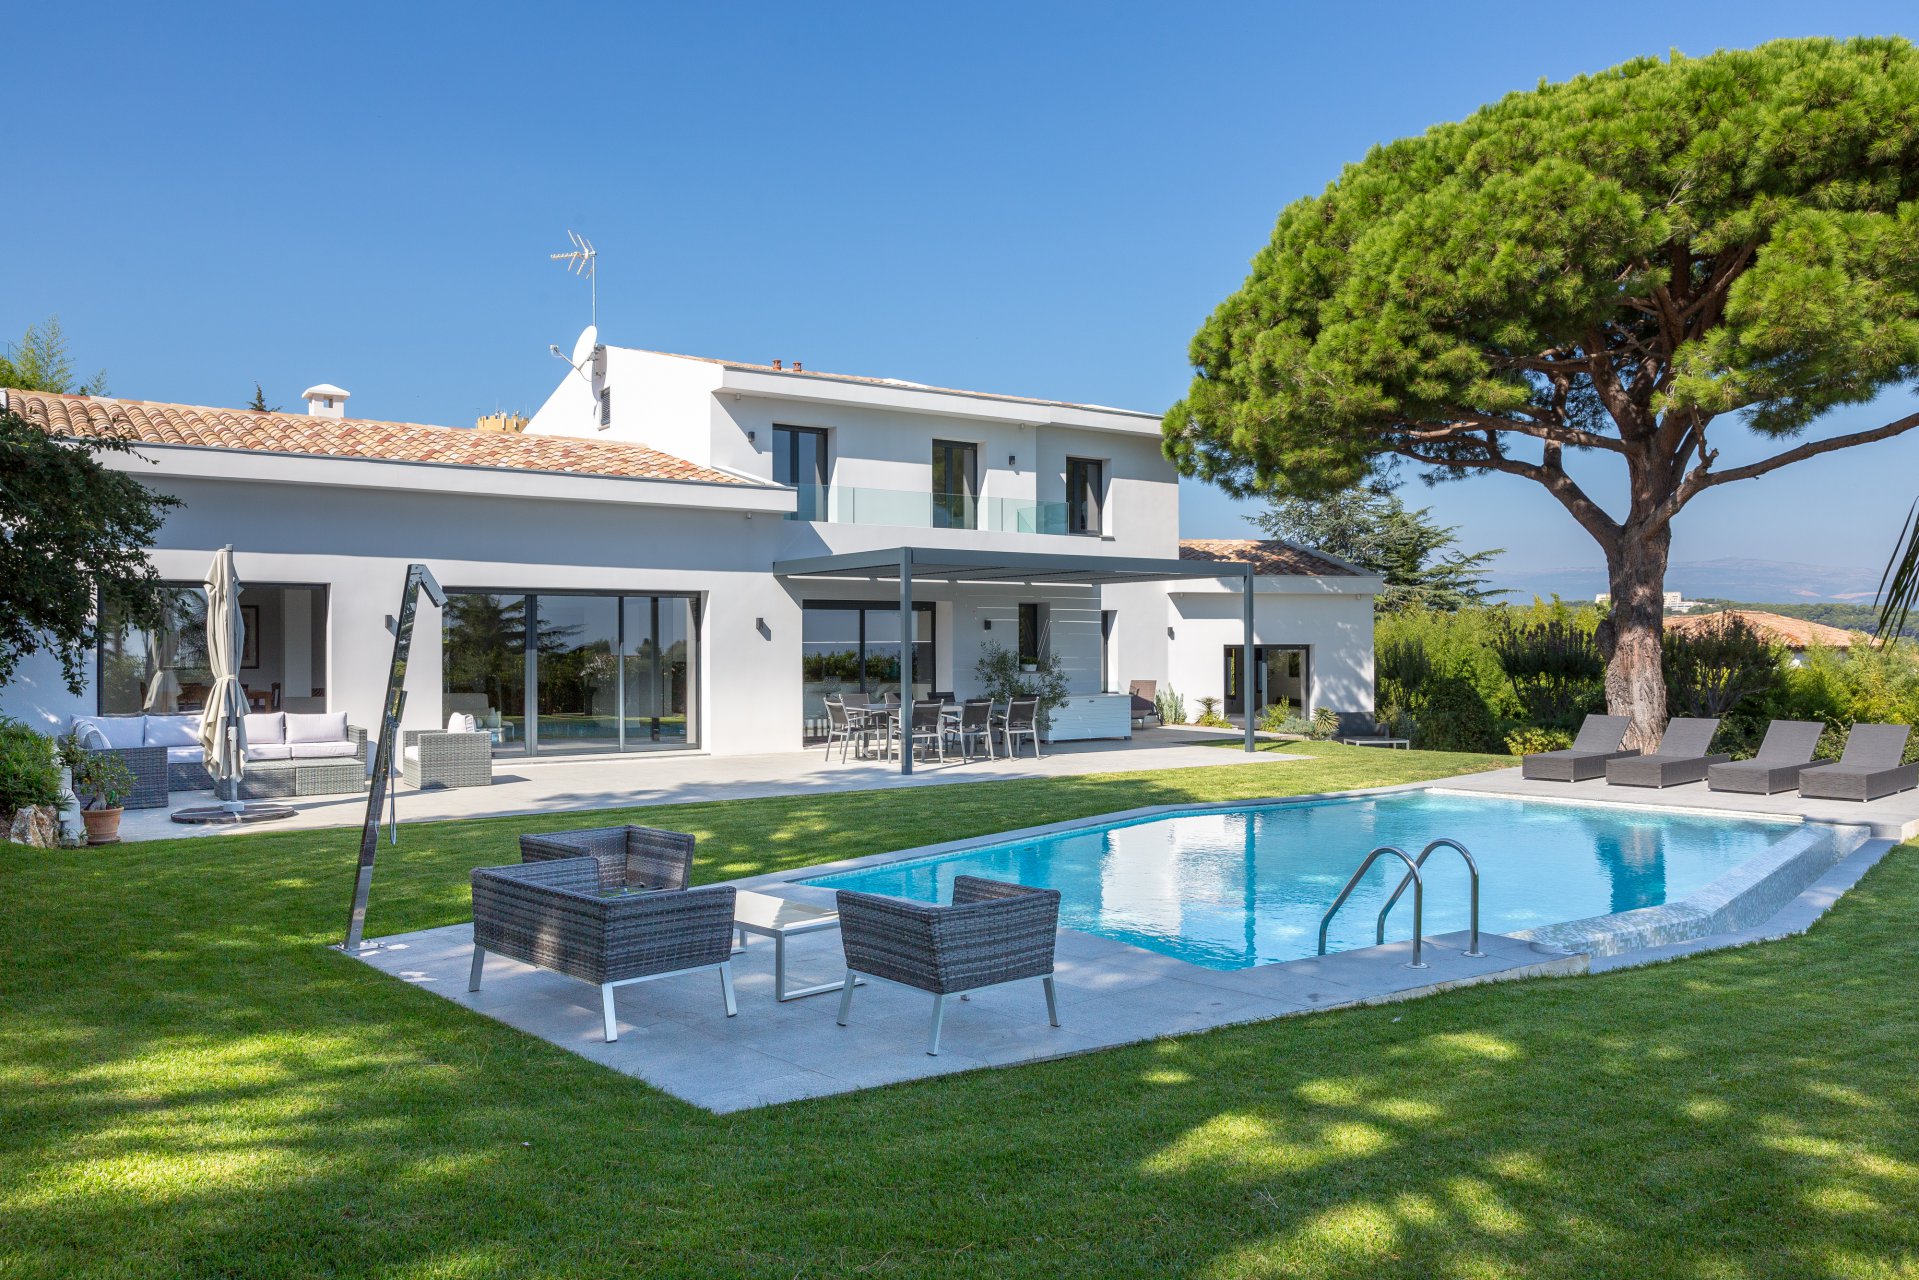 Ad Sale House Cannes Super Cannes (06400), 7 Rooms ref:V4788CA